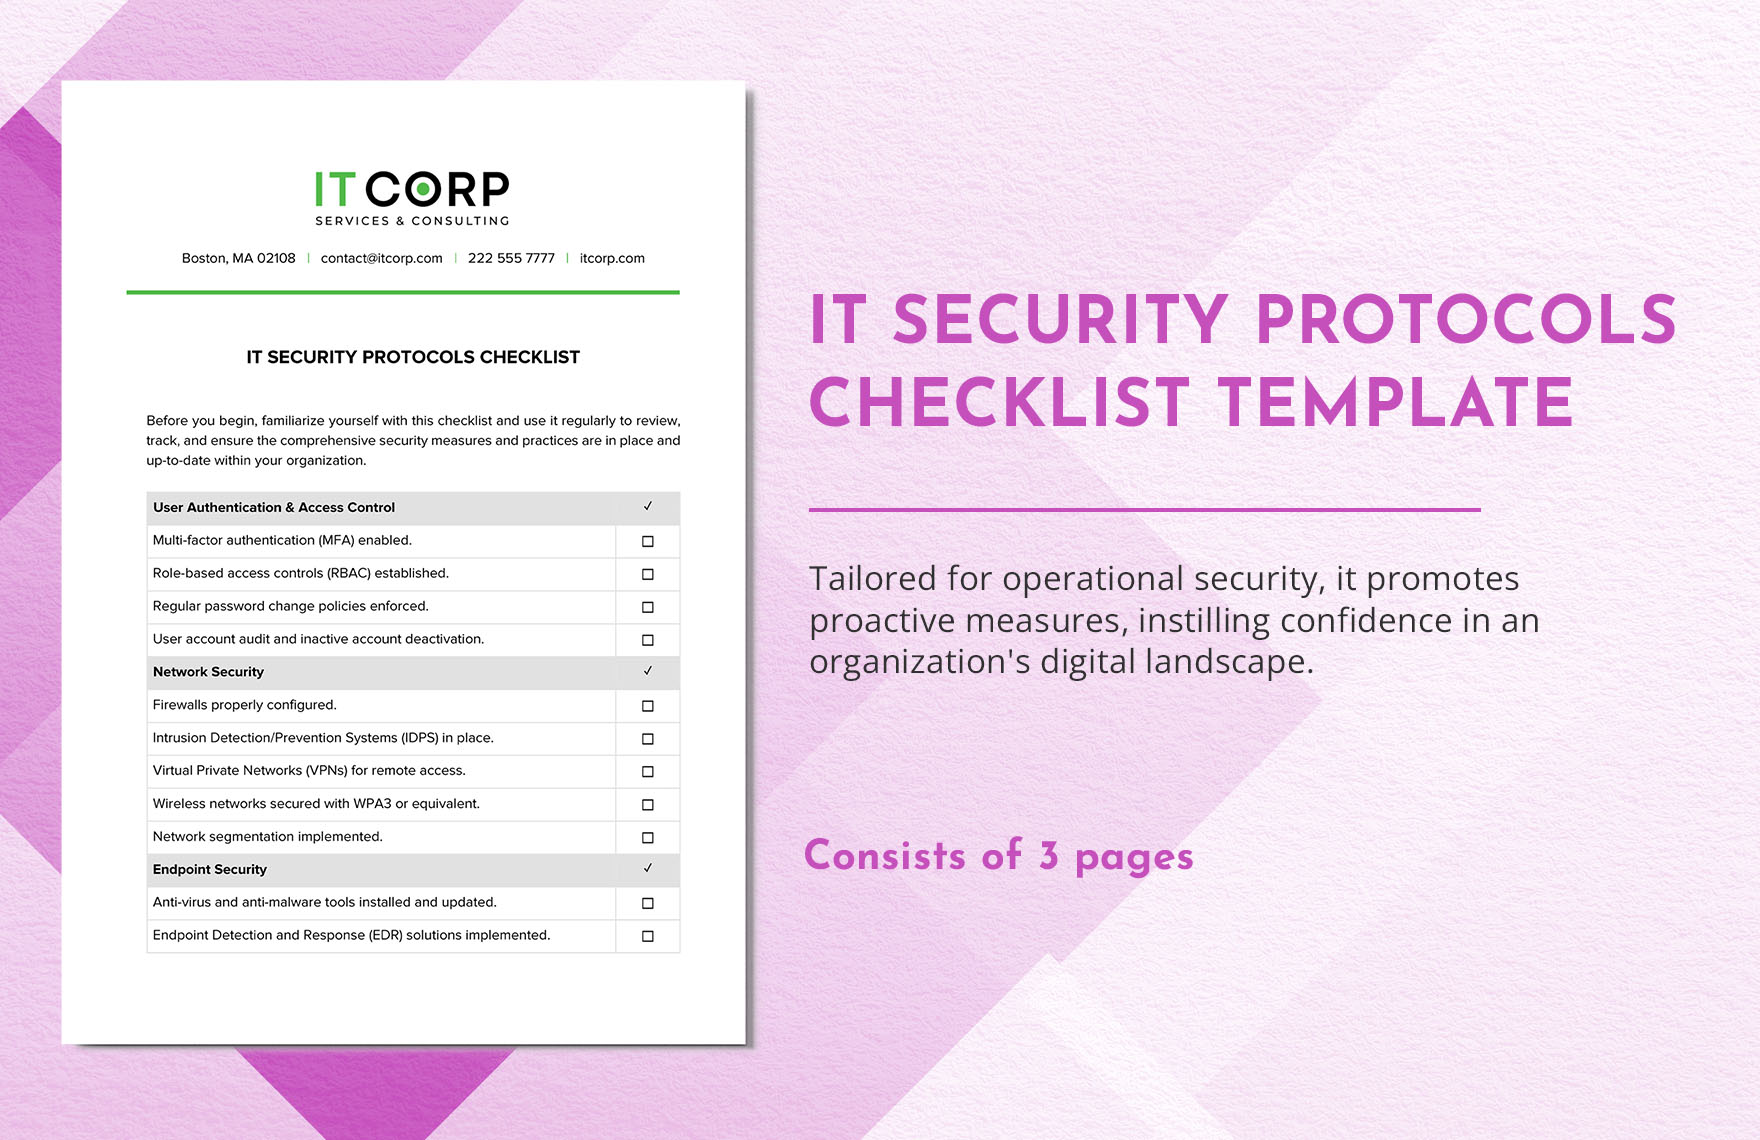 IT Security Protocols Checklist Template in Word, Google Docs, PDF